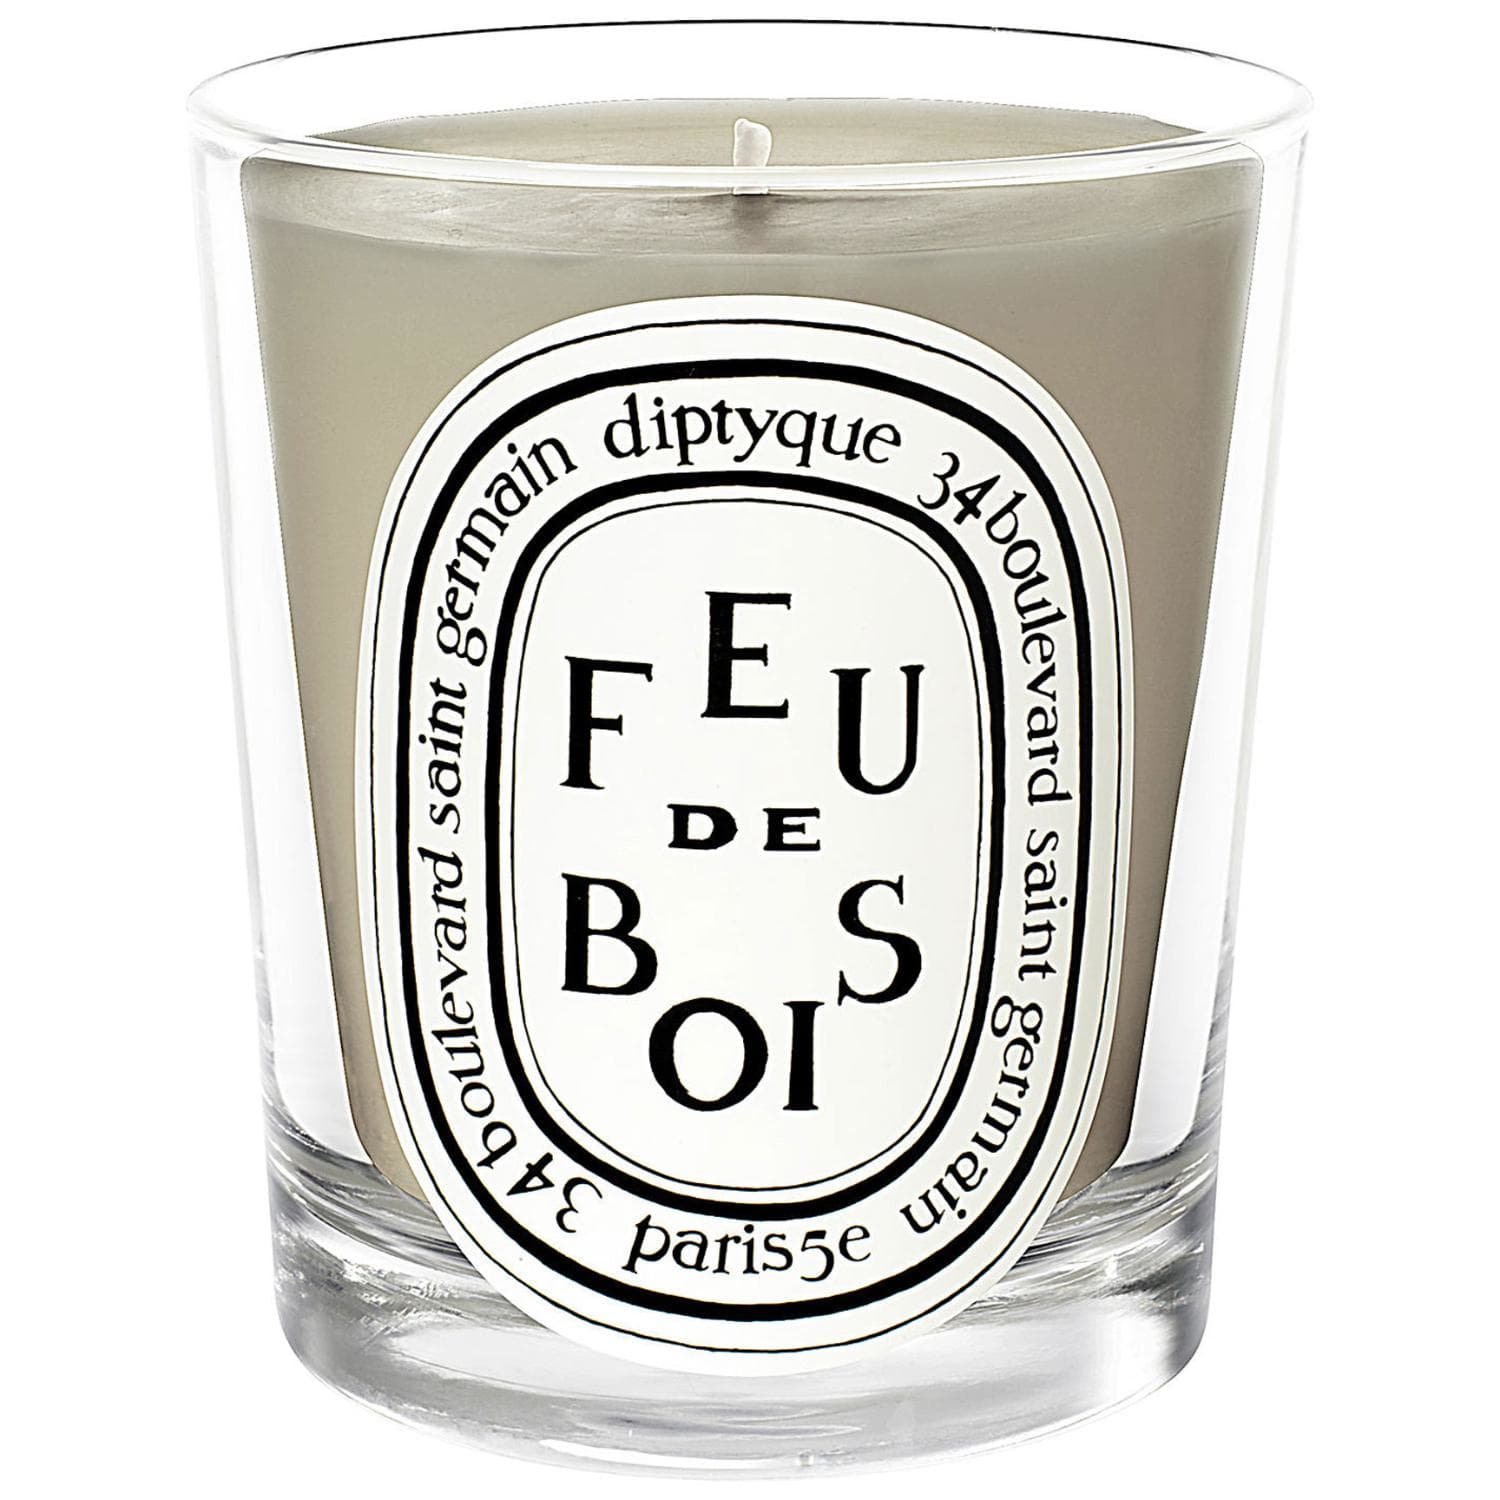 Candle that Smells Like Fireplace Best Of Perfume Notes Smoky Candles